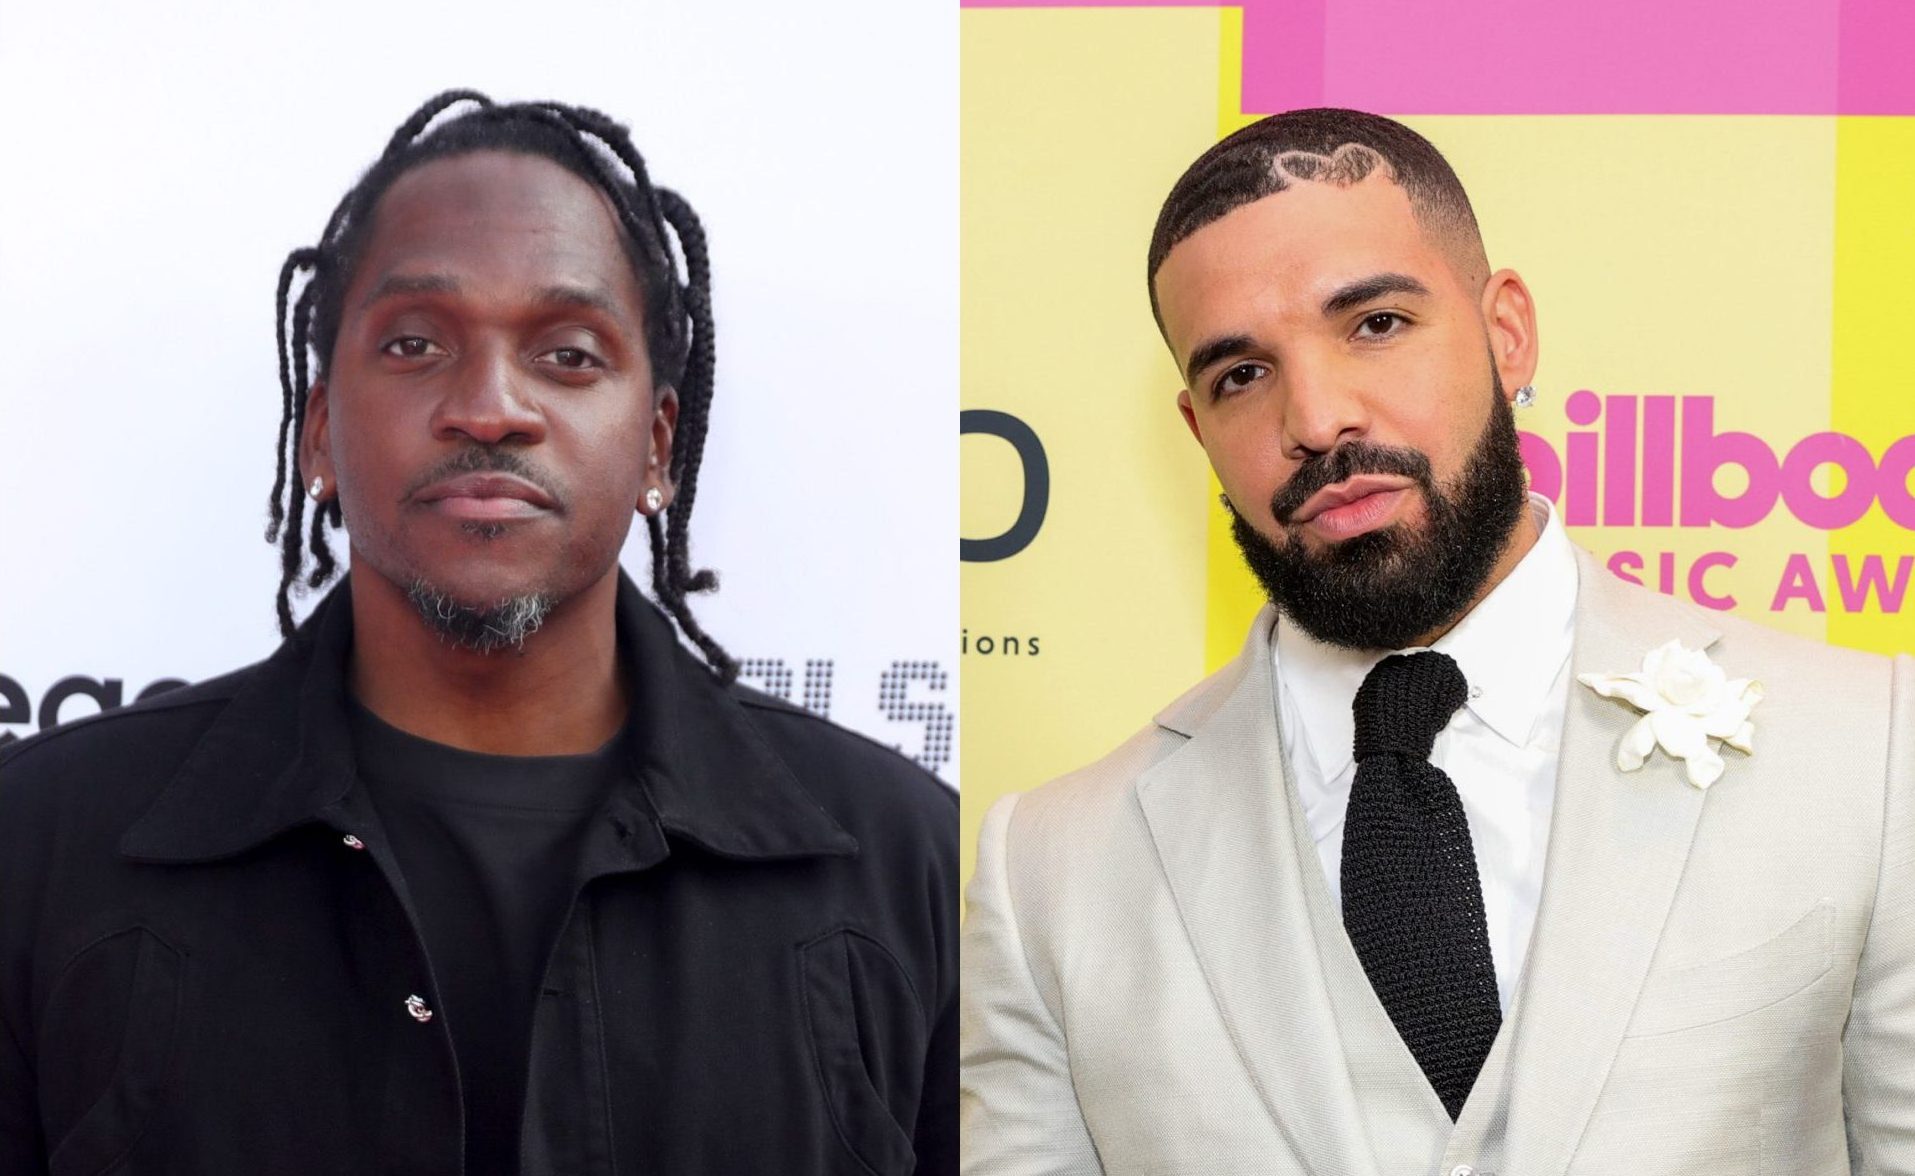 Pusha T Speaks On Squashing Beef With Drake: "I'm Not Entertaining It, But There's Nothing I Want From The Situation"